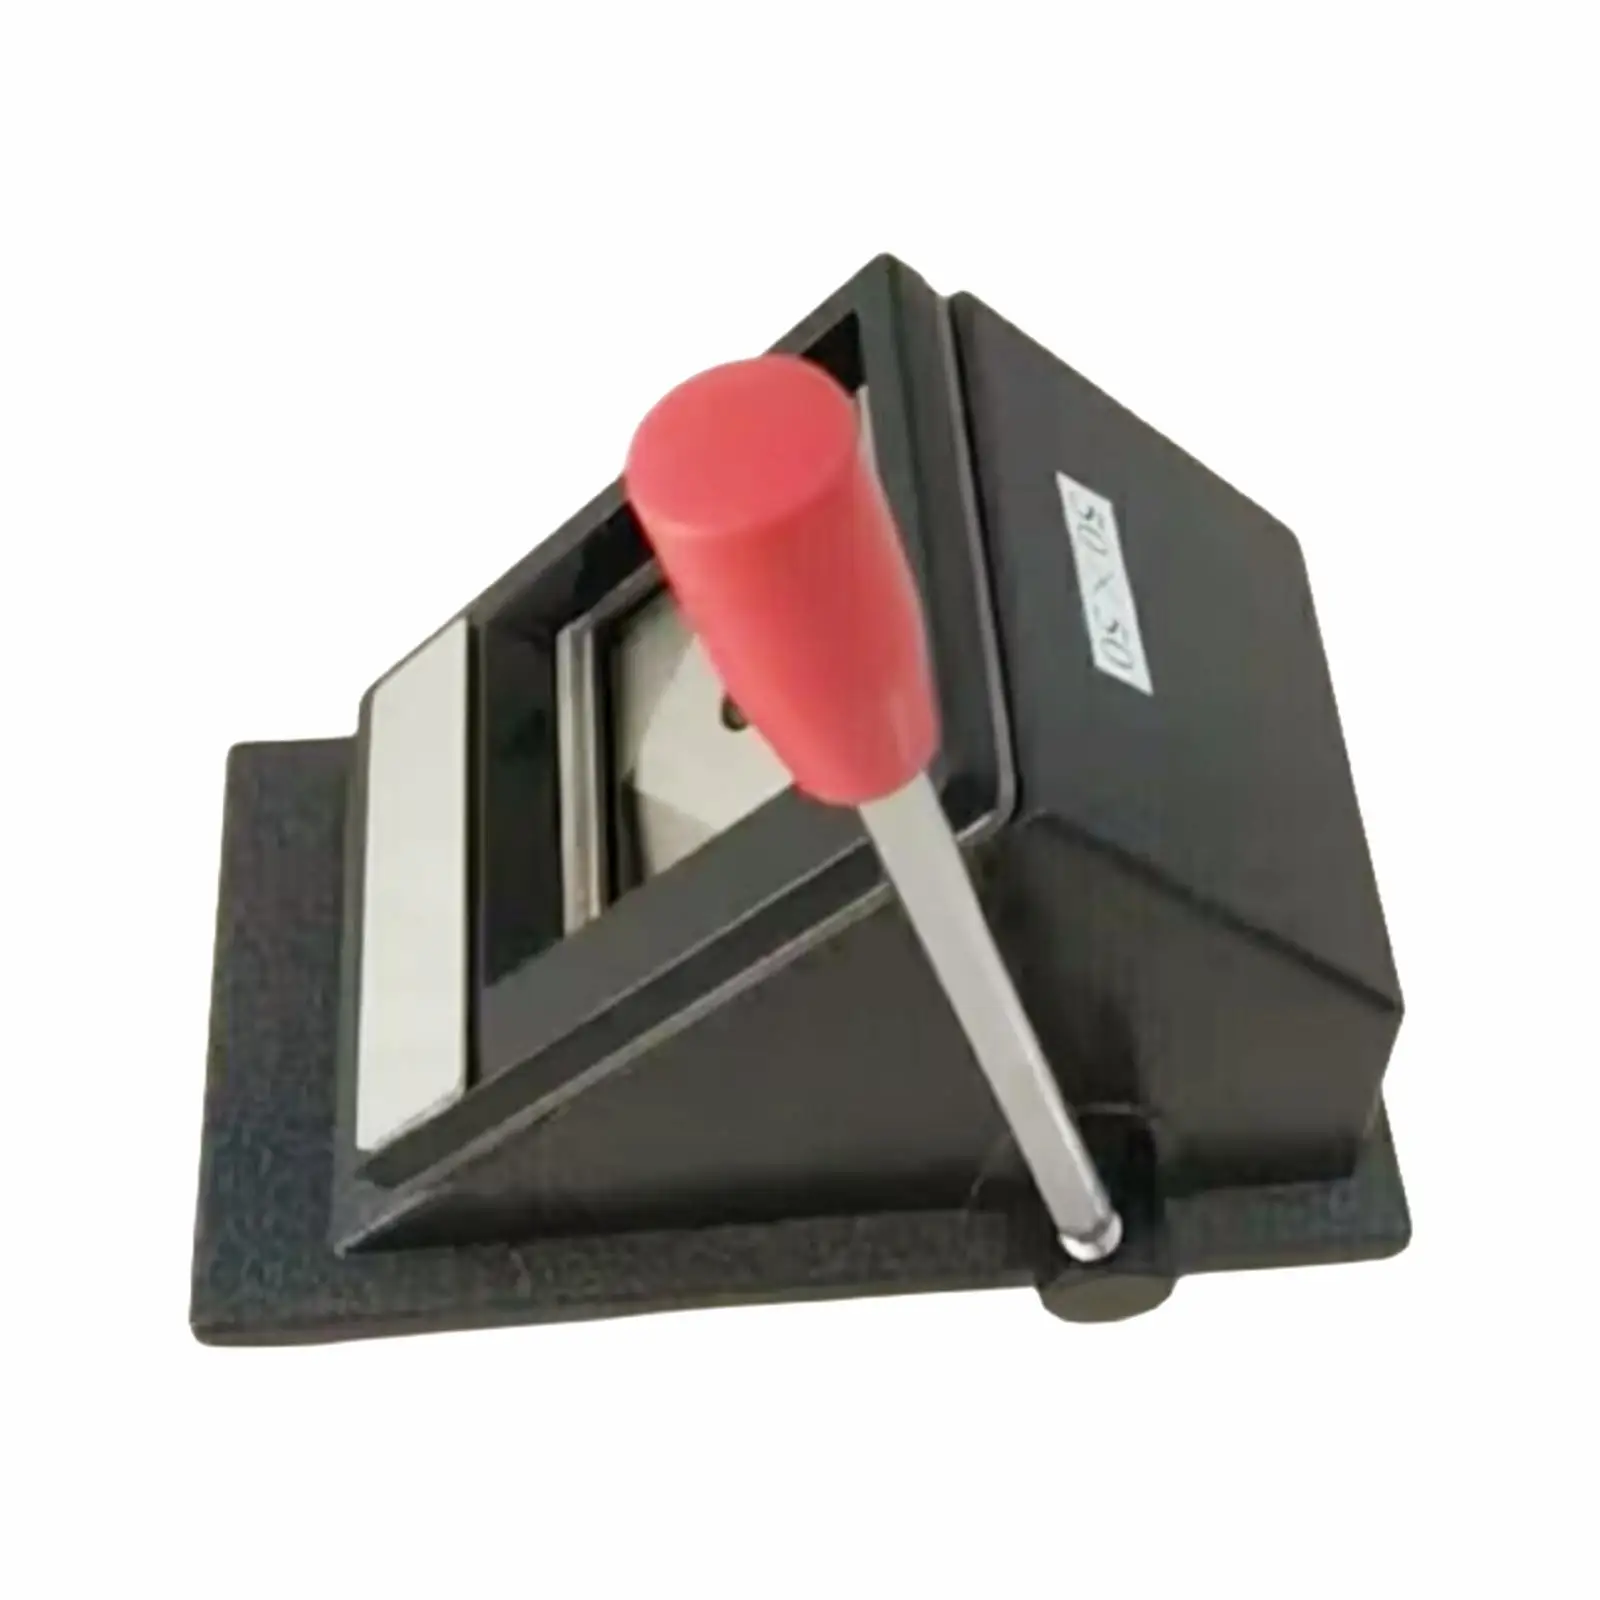 Passport ID Photo Cutter Manual Photo Punch Cutter Picture Cutter for Scrapbooking Credit Card Home Office ID Card Business Card